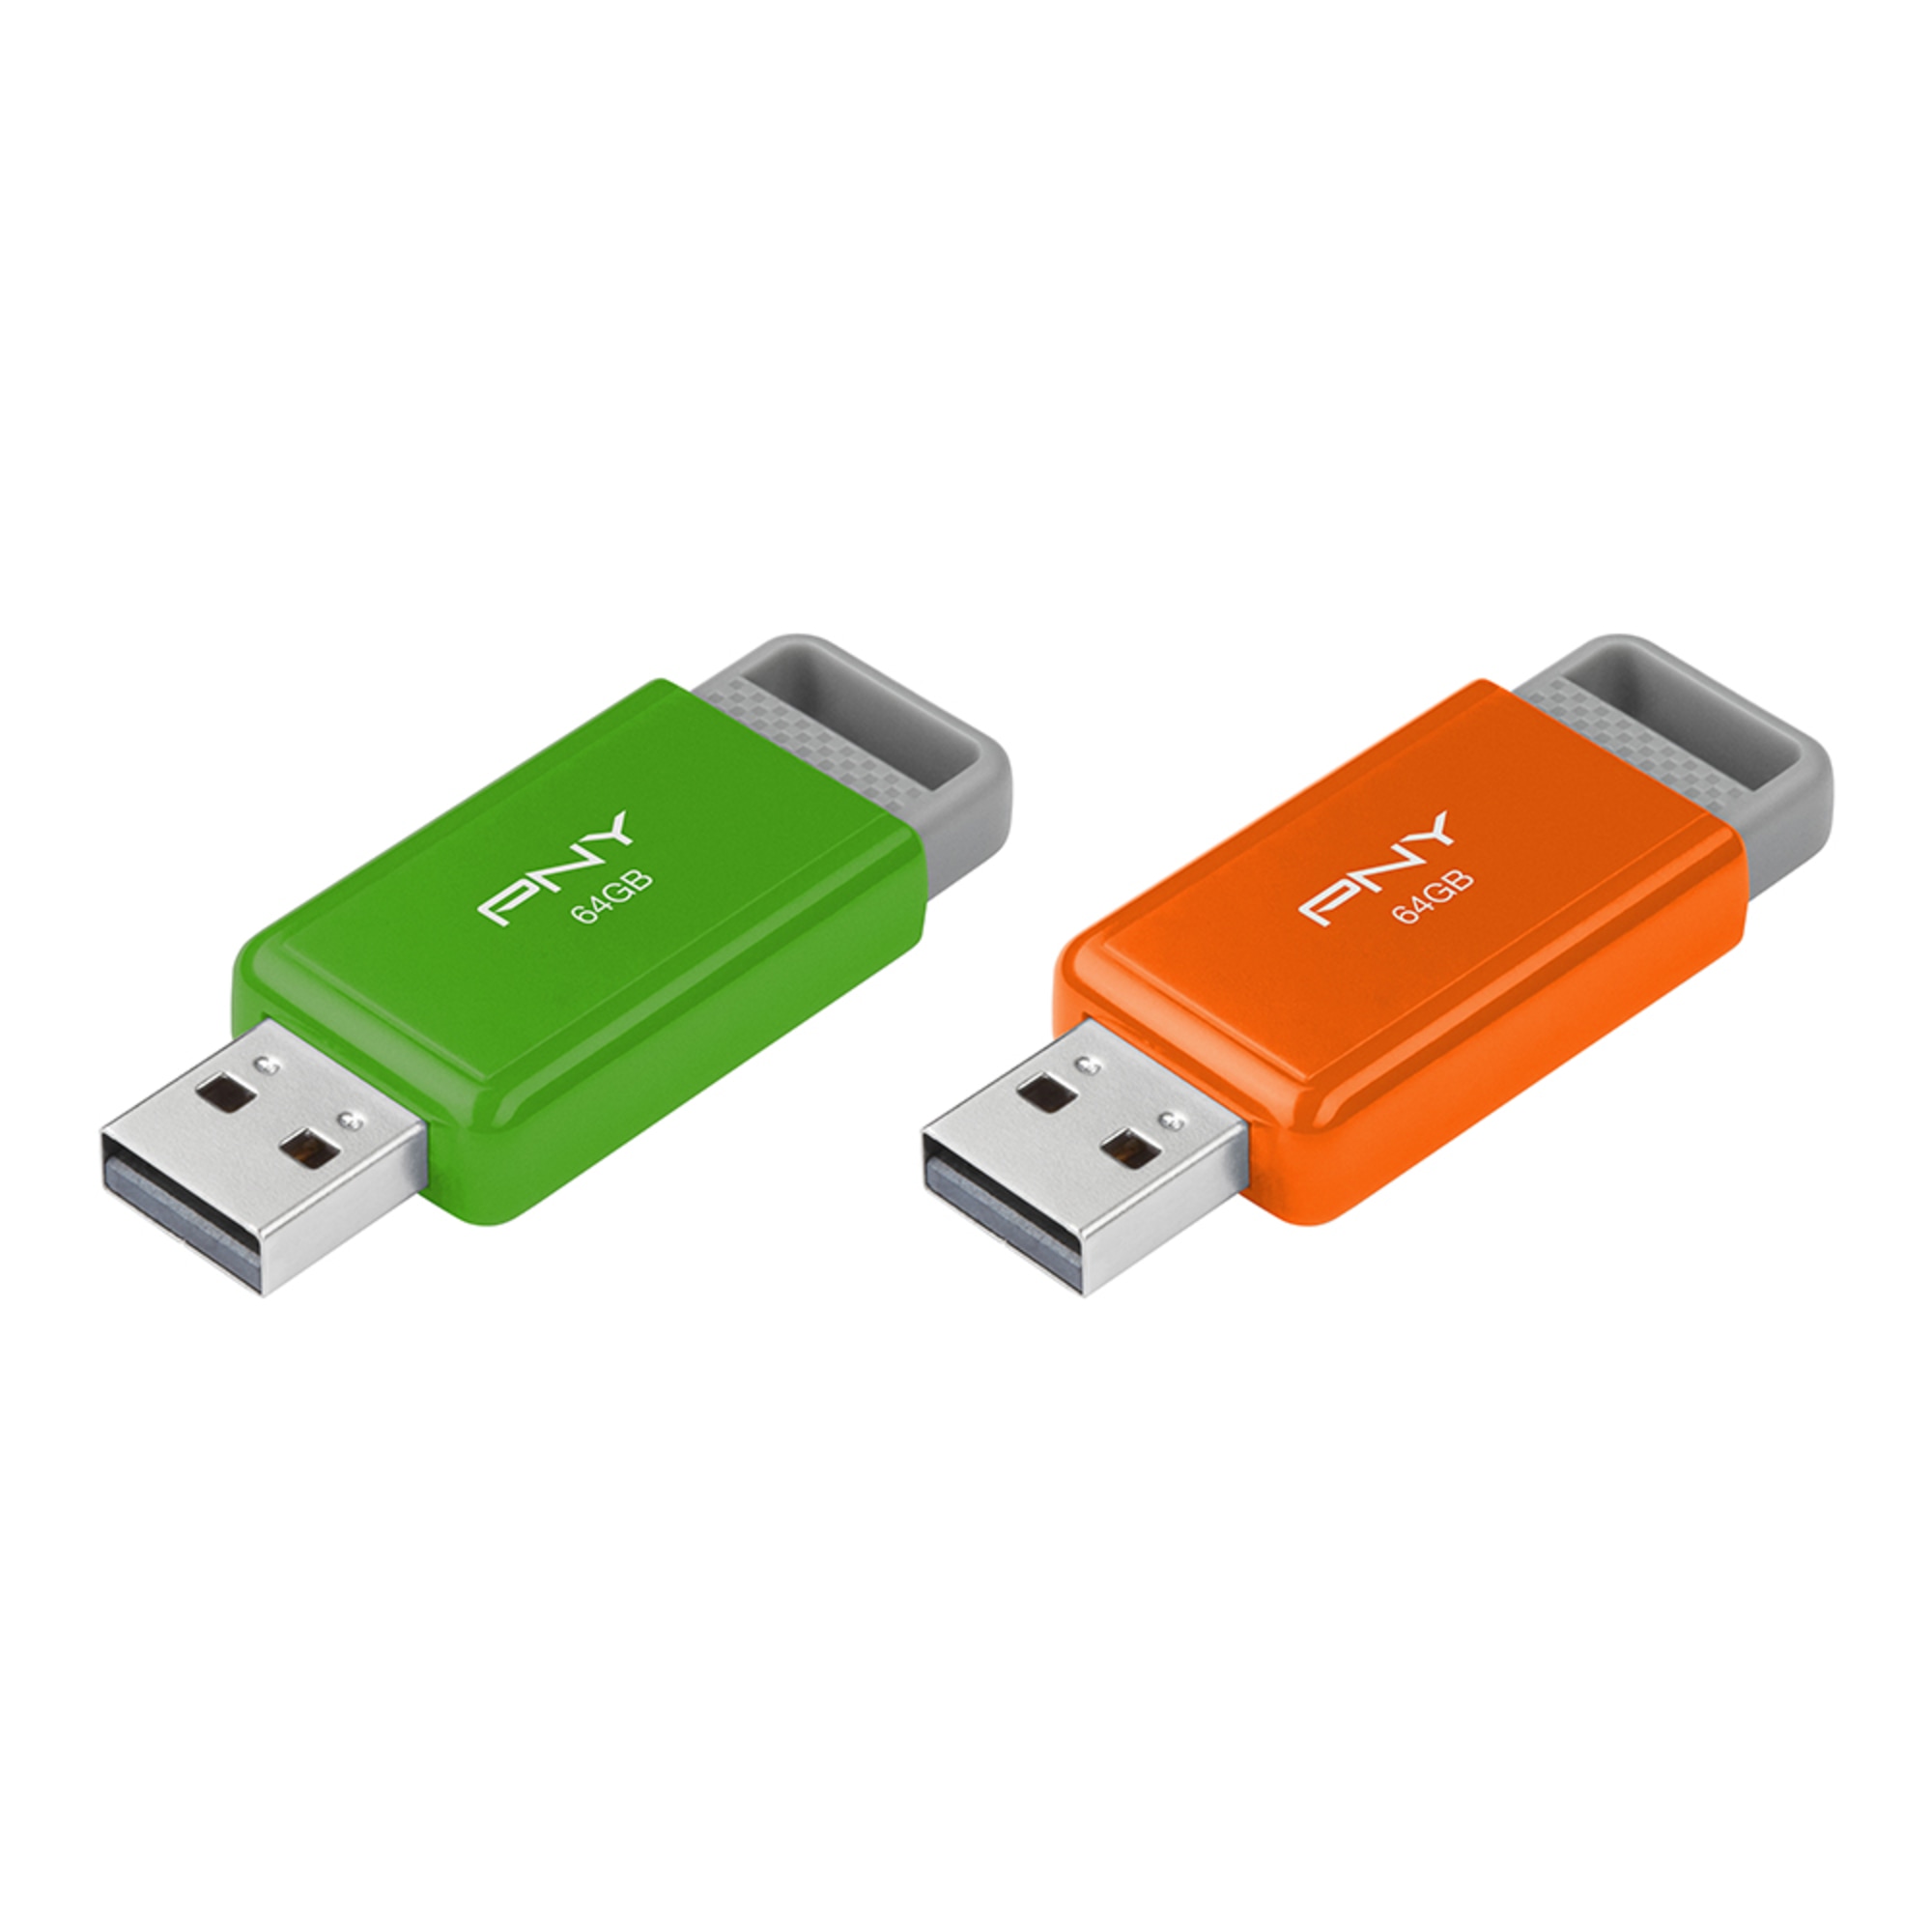 PNY USB 2.0 Flash Drives, 64GB, Pack Of 2 Flash Drives - image 4 of 7